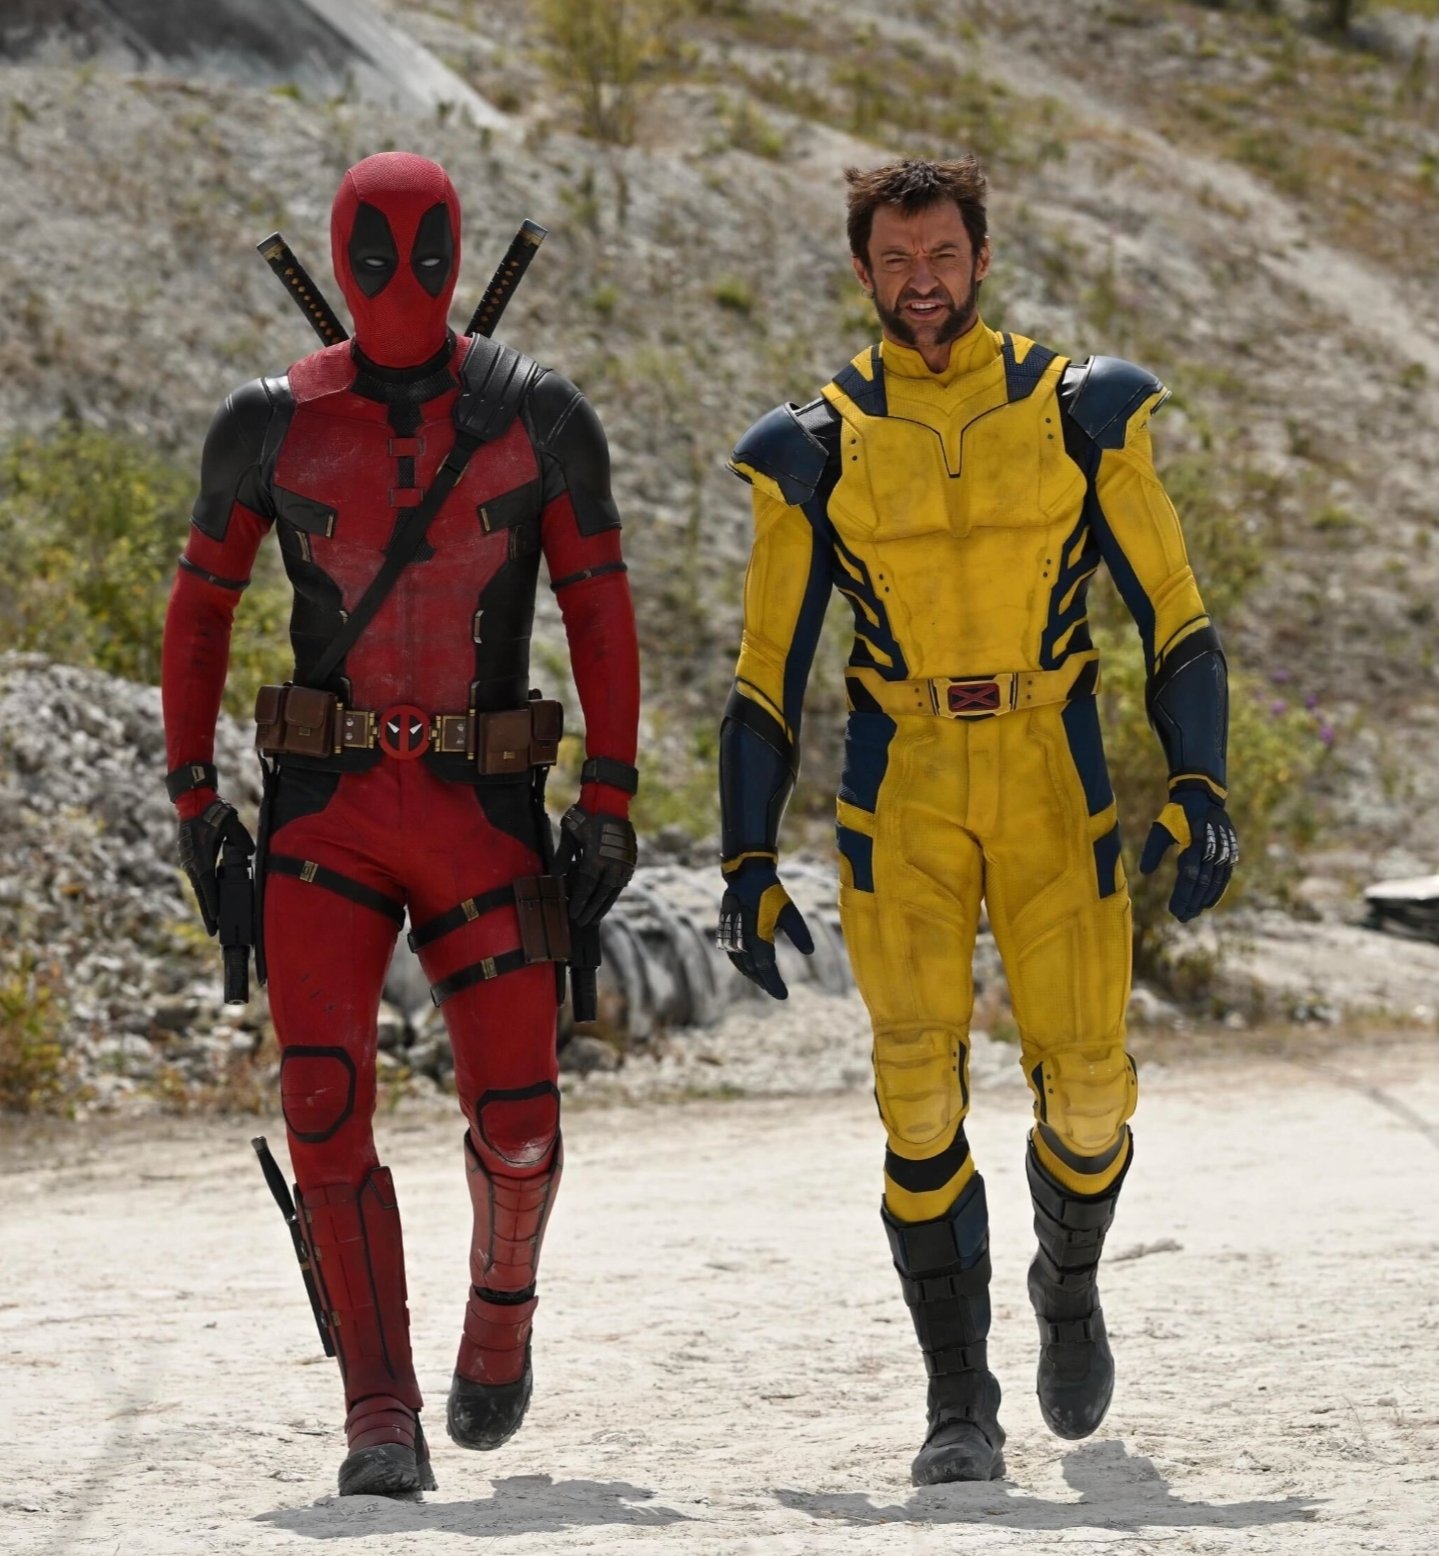 Deadpool 3 Plot - unfolds post-Loki S2, where the TVA, aware of a looming  Multiversal War, recruits heroes from dying worlds to battle the Council of  Kangs. Deadpool, a time-messing prisoner, escapes